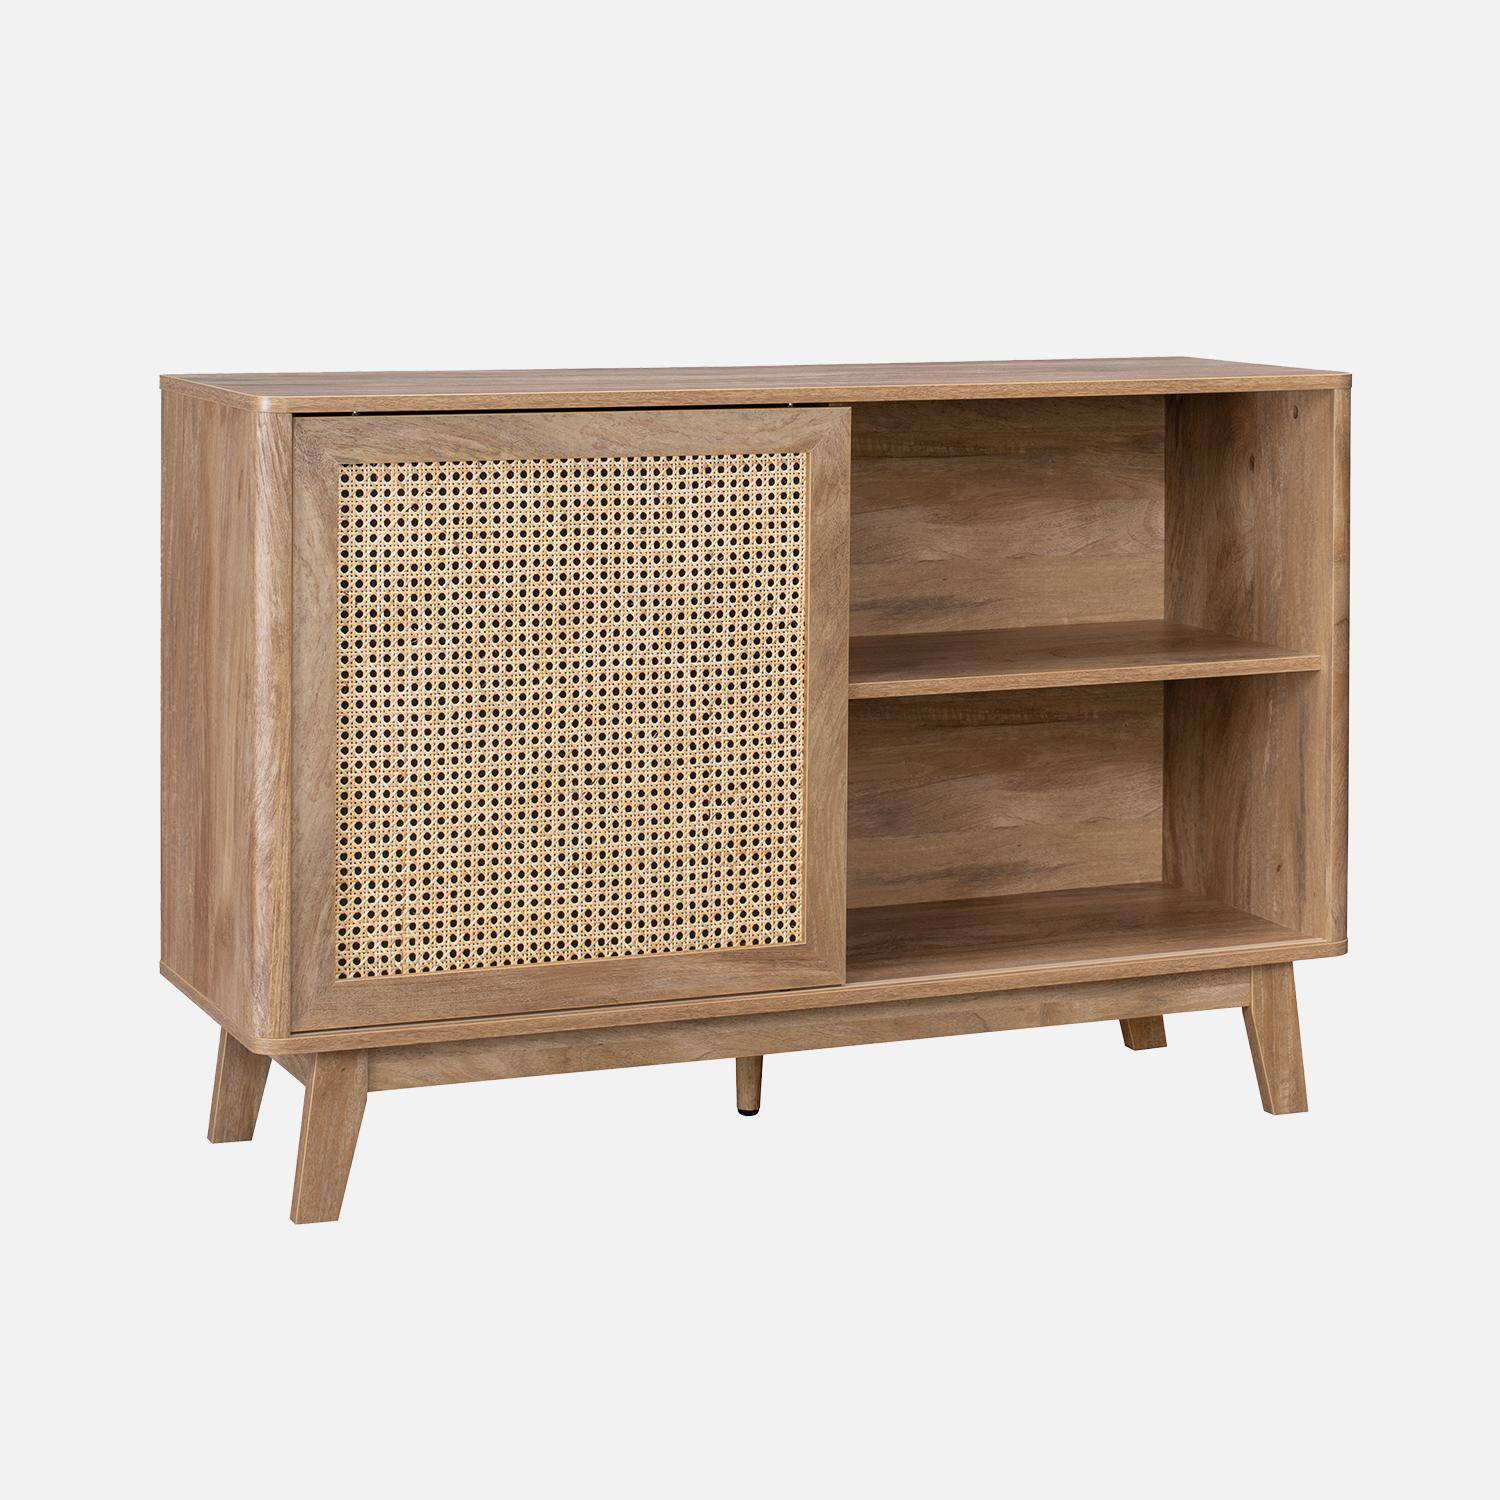 120cm sideboard with 1 sliding door and shelves, wood effect and cane detail Photo1